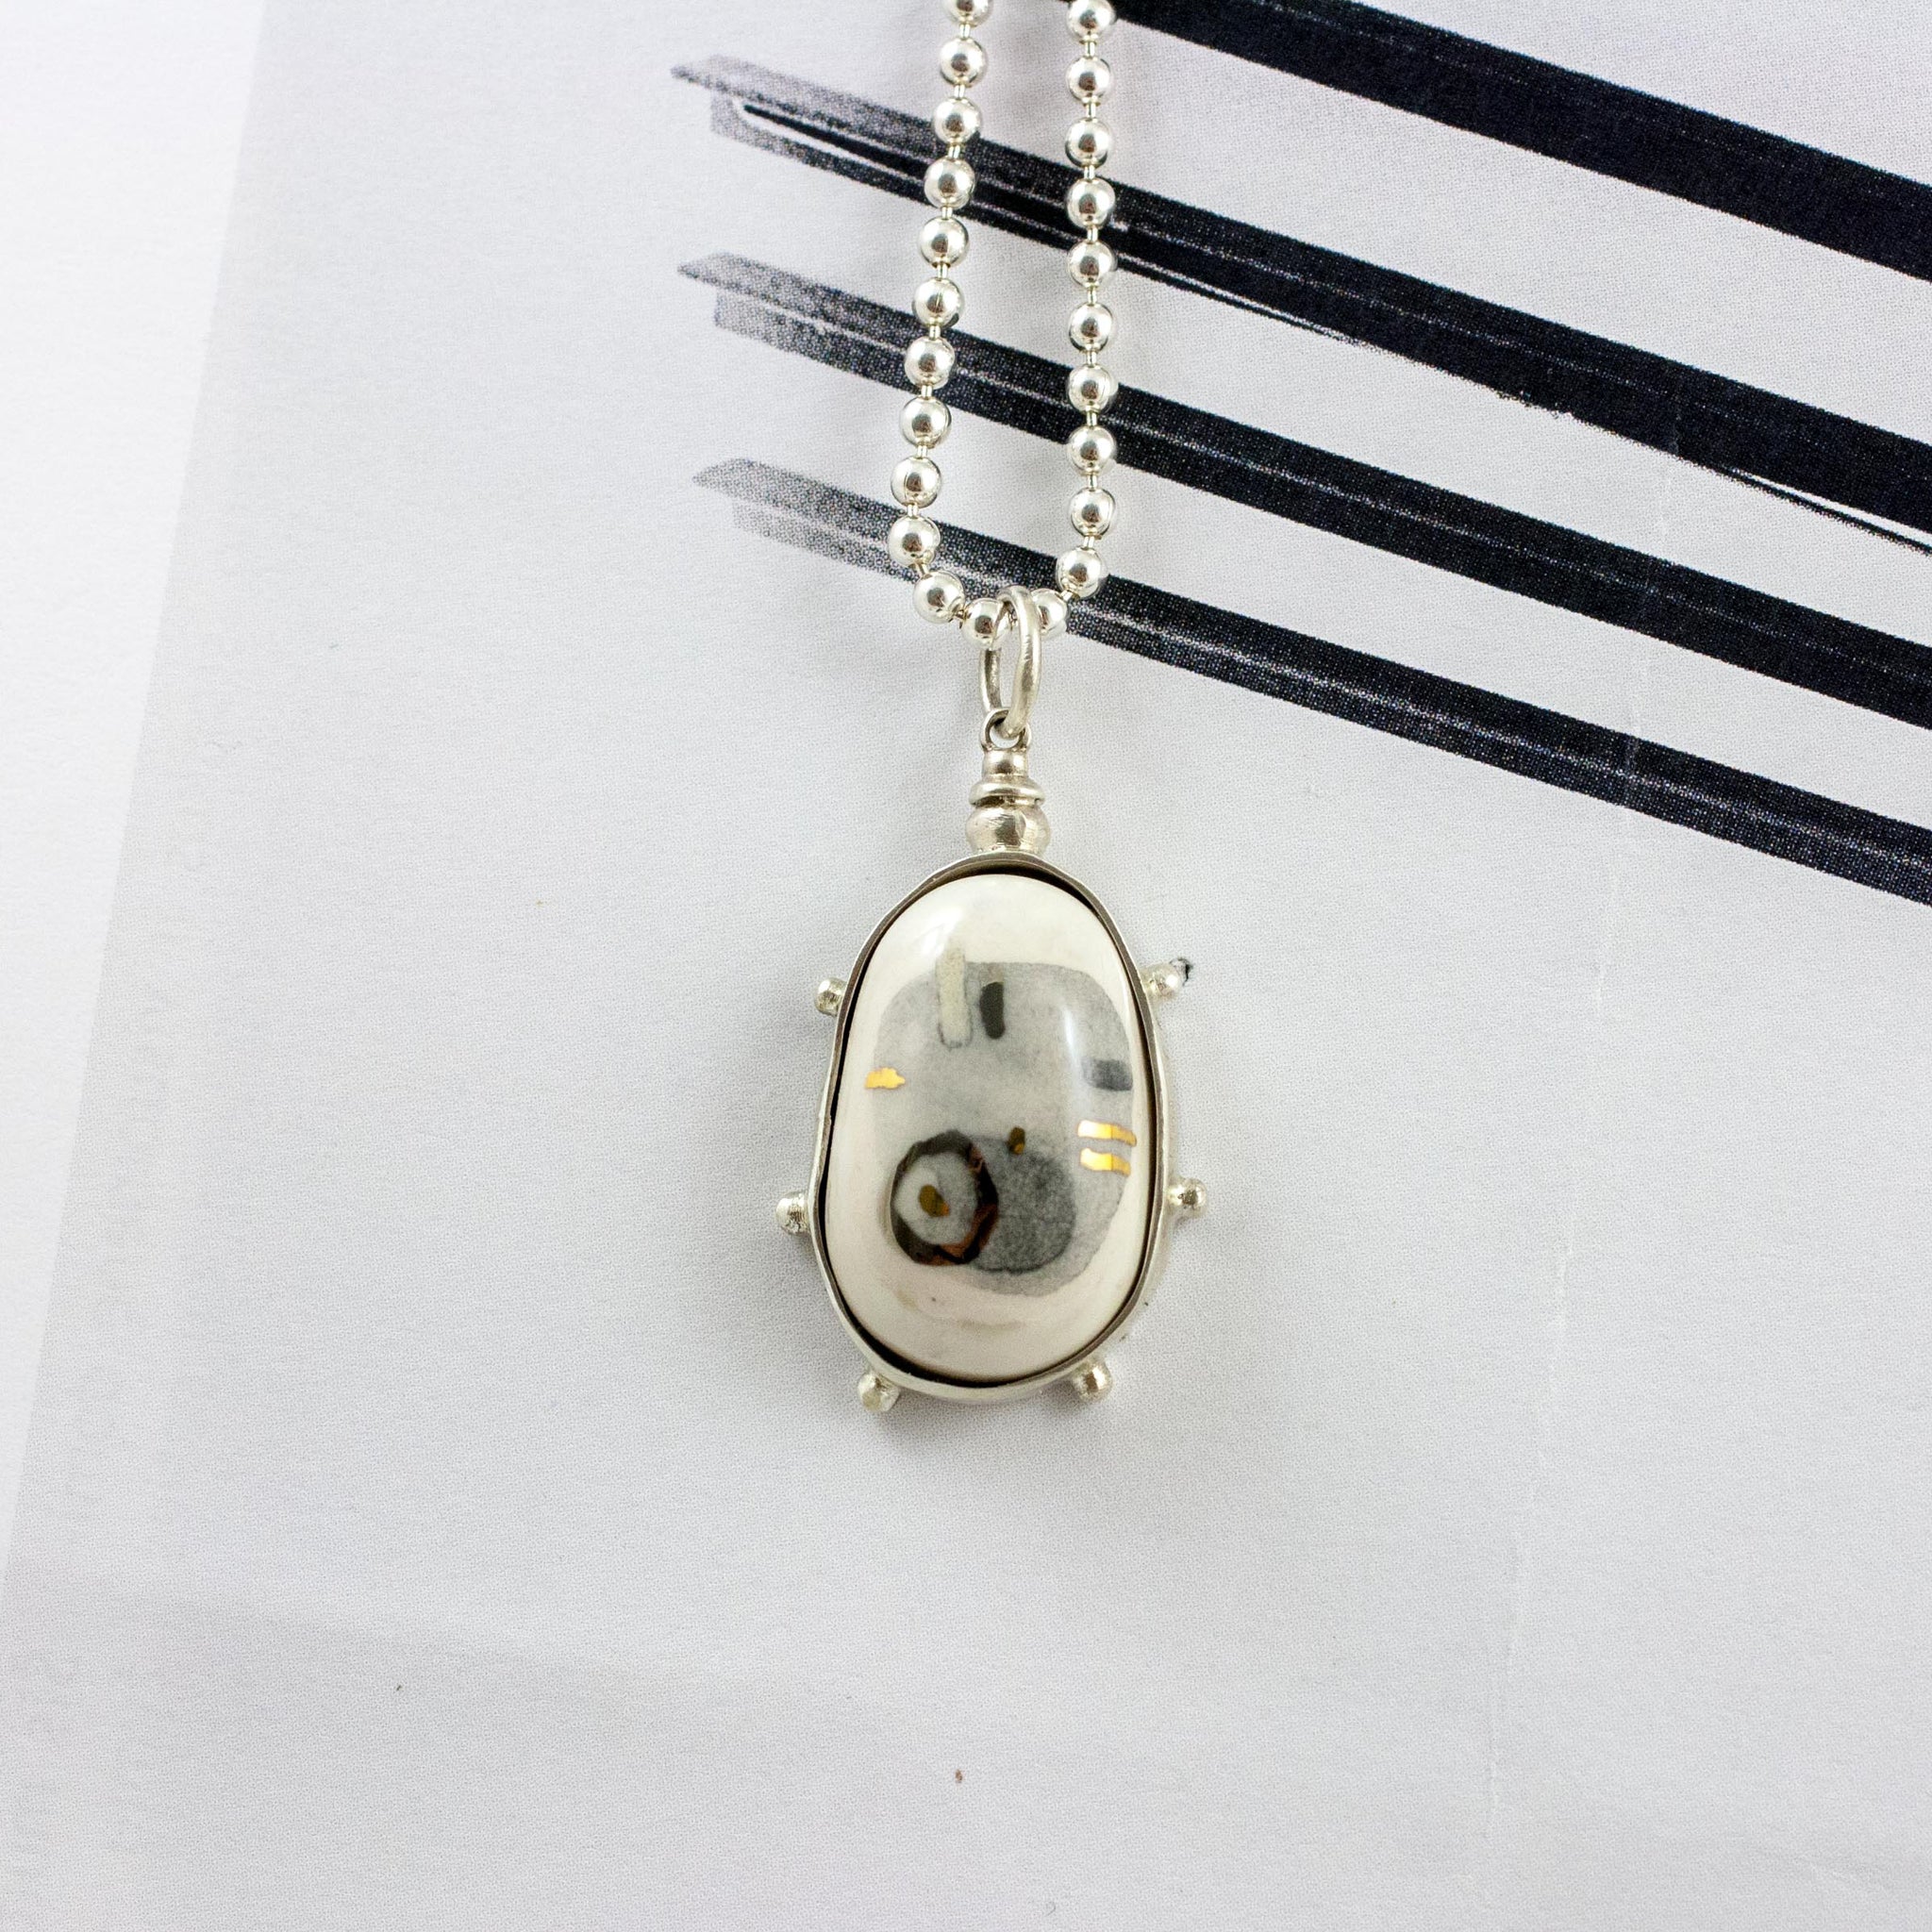 White pendant with abstract motives